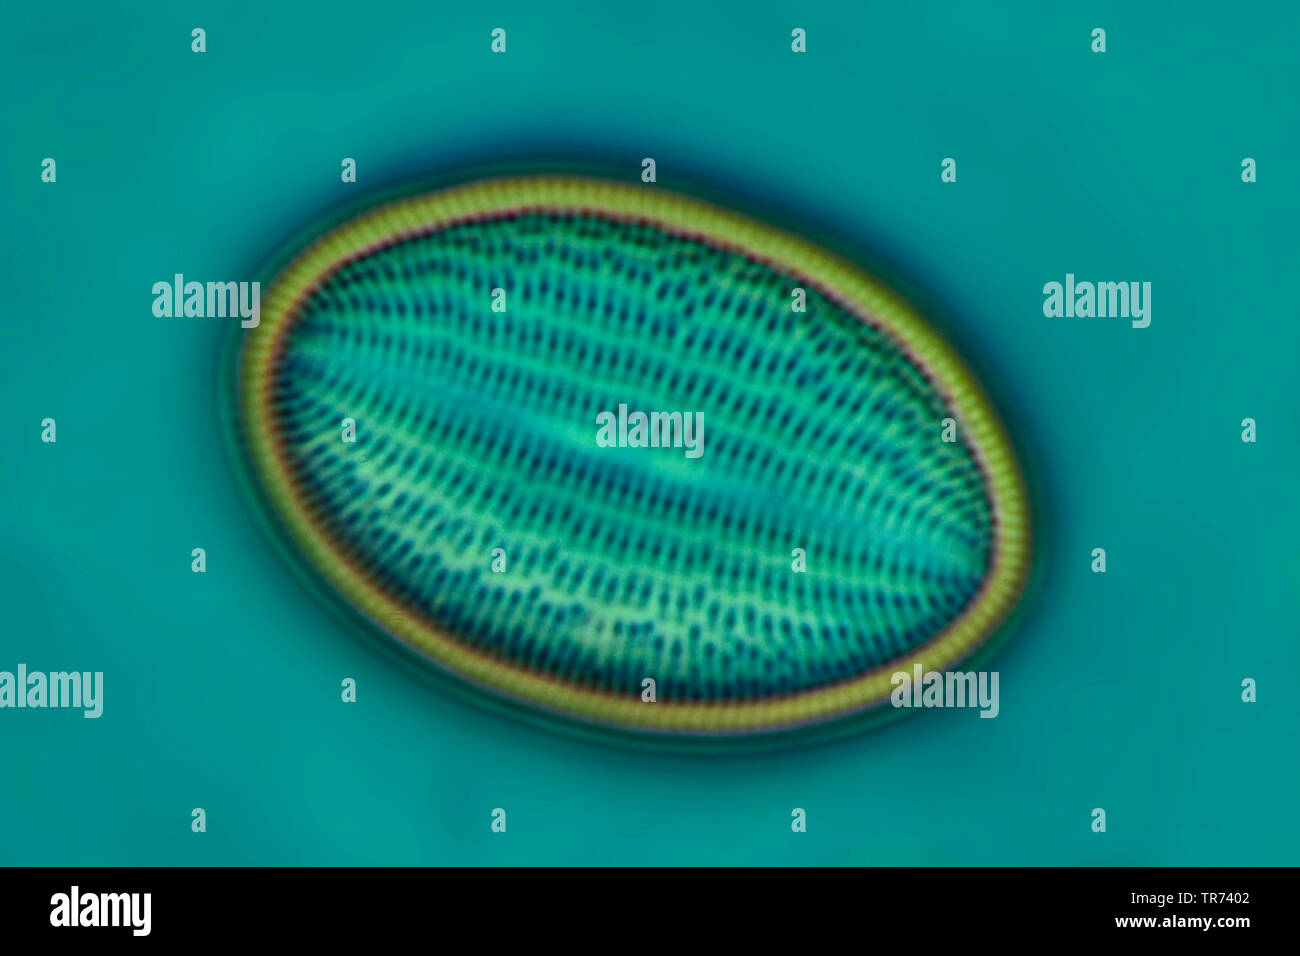 diatom (Diatomeae), diatom in phase contrast and interference contrast, x 240 Stock Photo